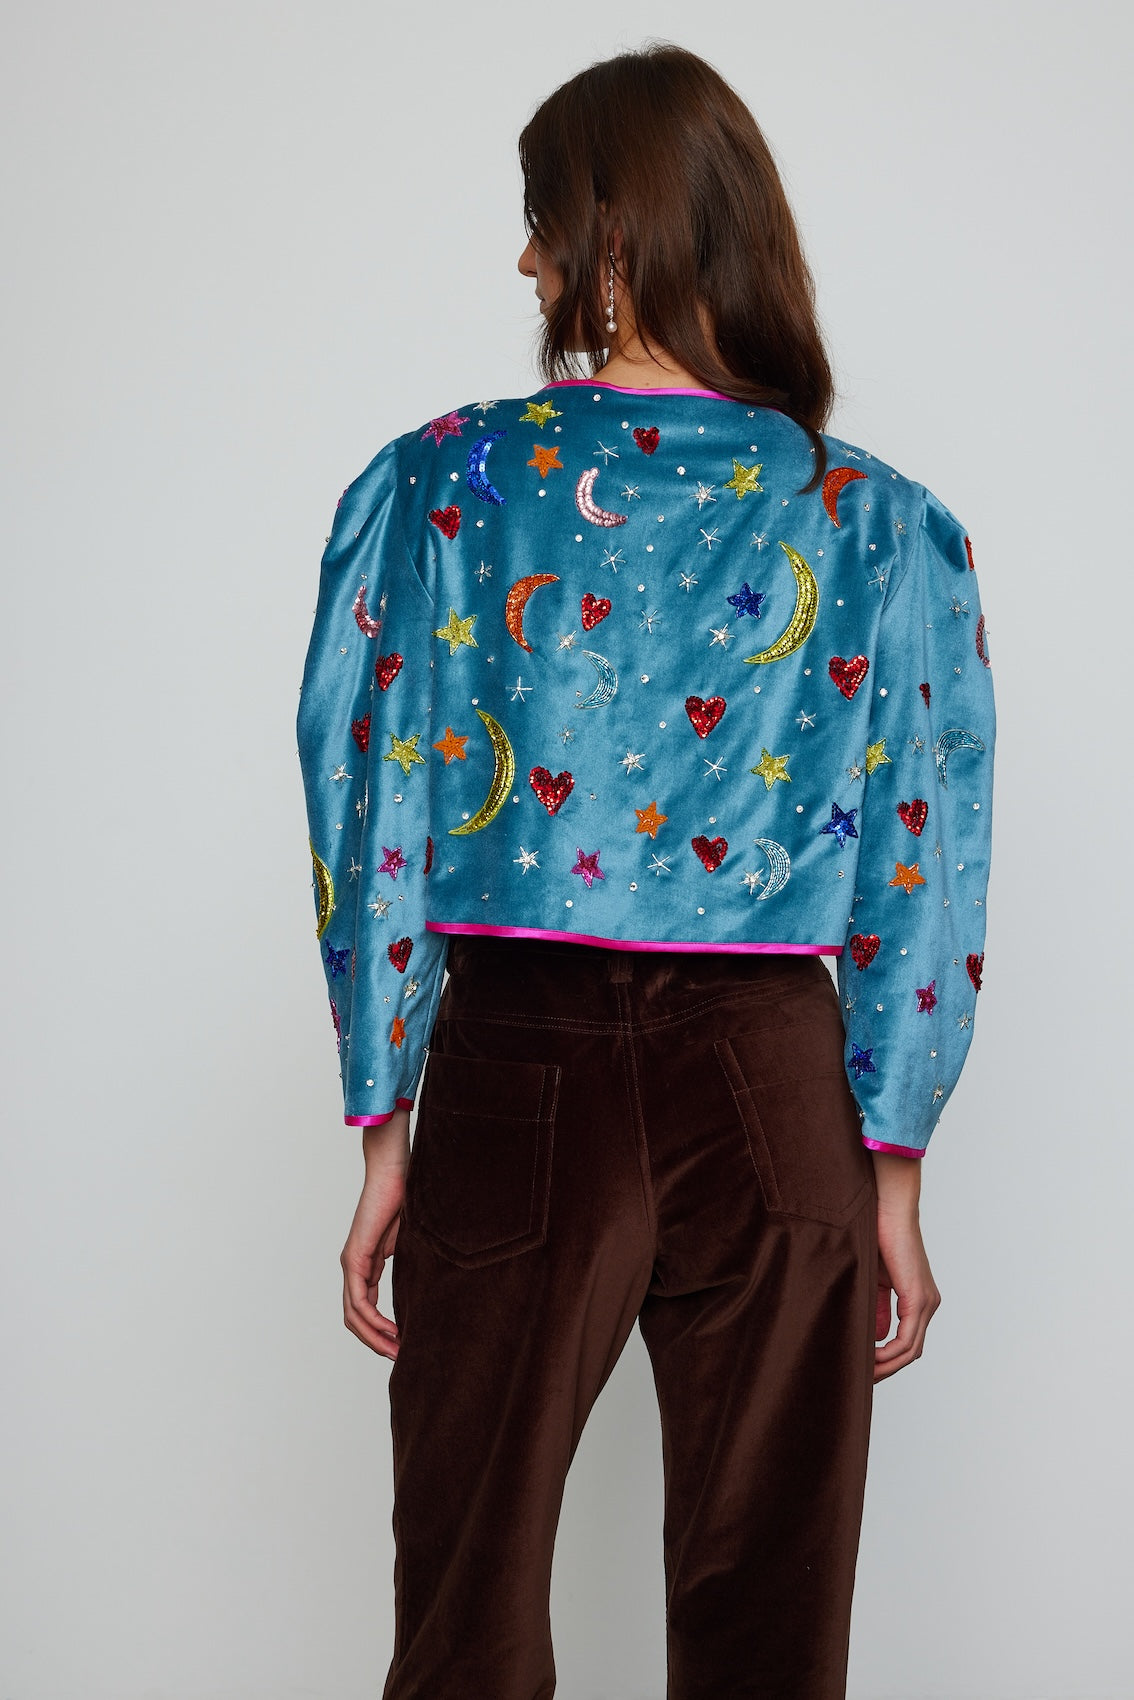 Caro Editions Blanca Jackets is one-of-kind, exquisitely hand-embroidered by skilled artisans using beads and sequins. This vibrant jacket is made in soft cotton velvet with silk lining and petit silk-covered buttons.  Material: 100% cotton. Lining: 100% silk satin. Beading: polyester & glass.